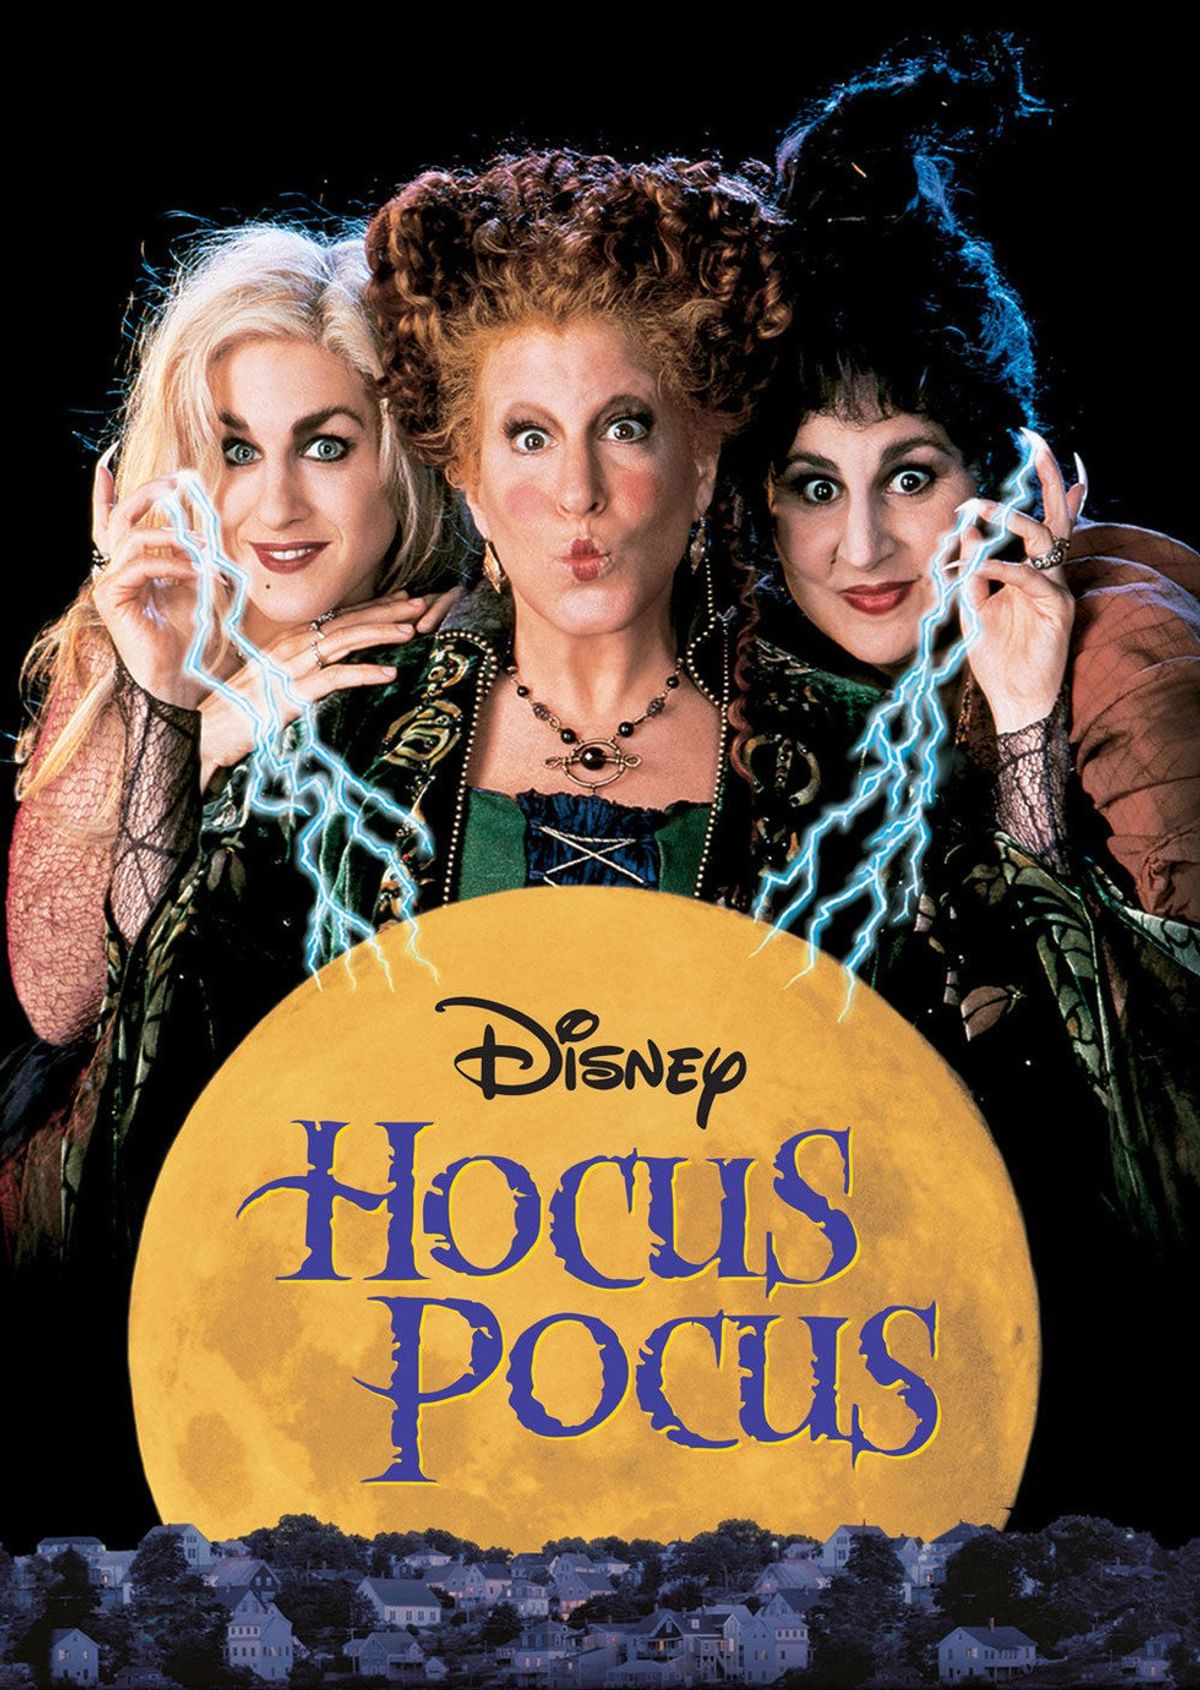 The Witchy Cast Of 'Hocus Pocus': Then And Now